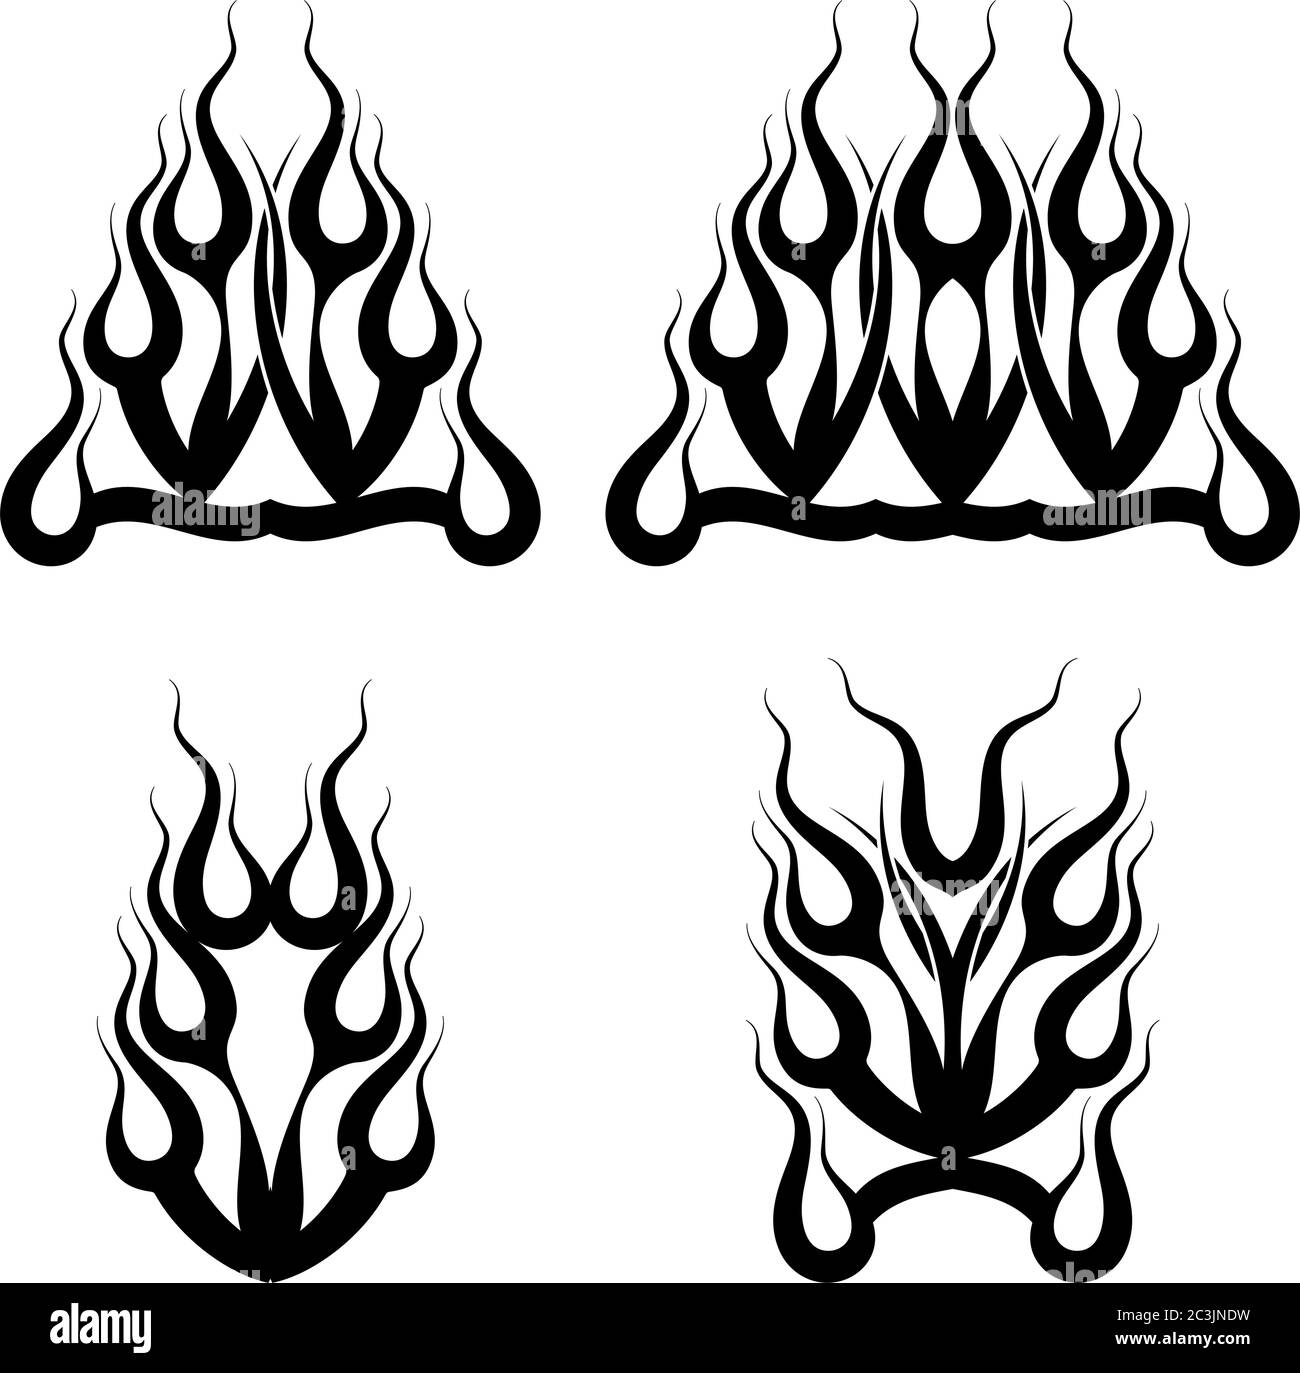 Tribal Fire Flame Tattoo Vector Illustration Stock Vector